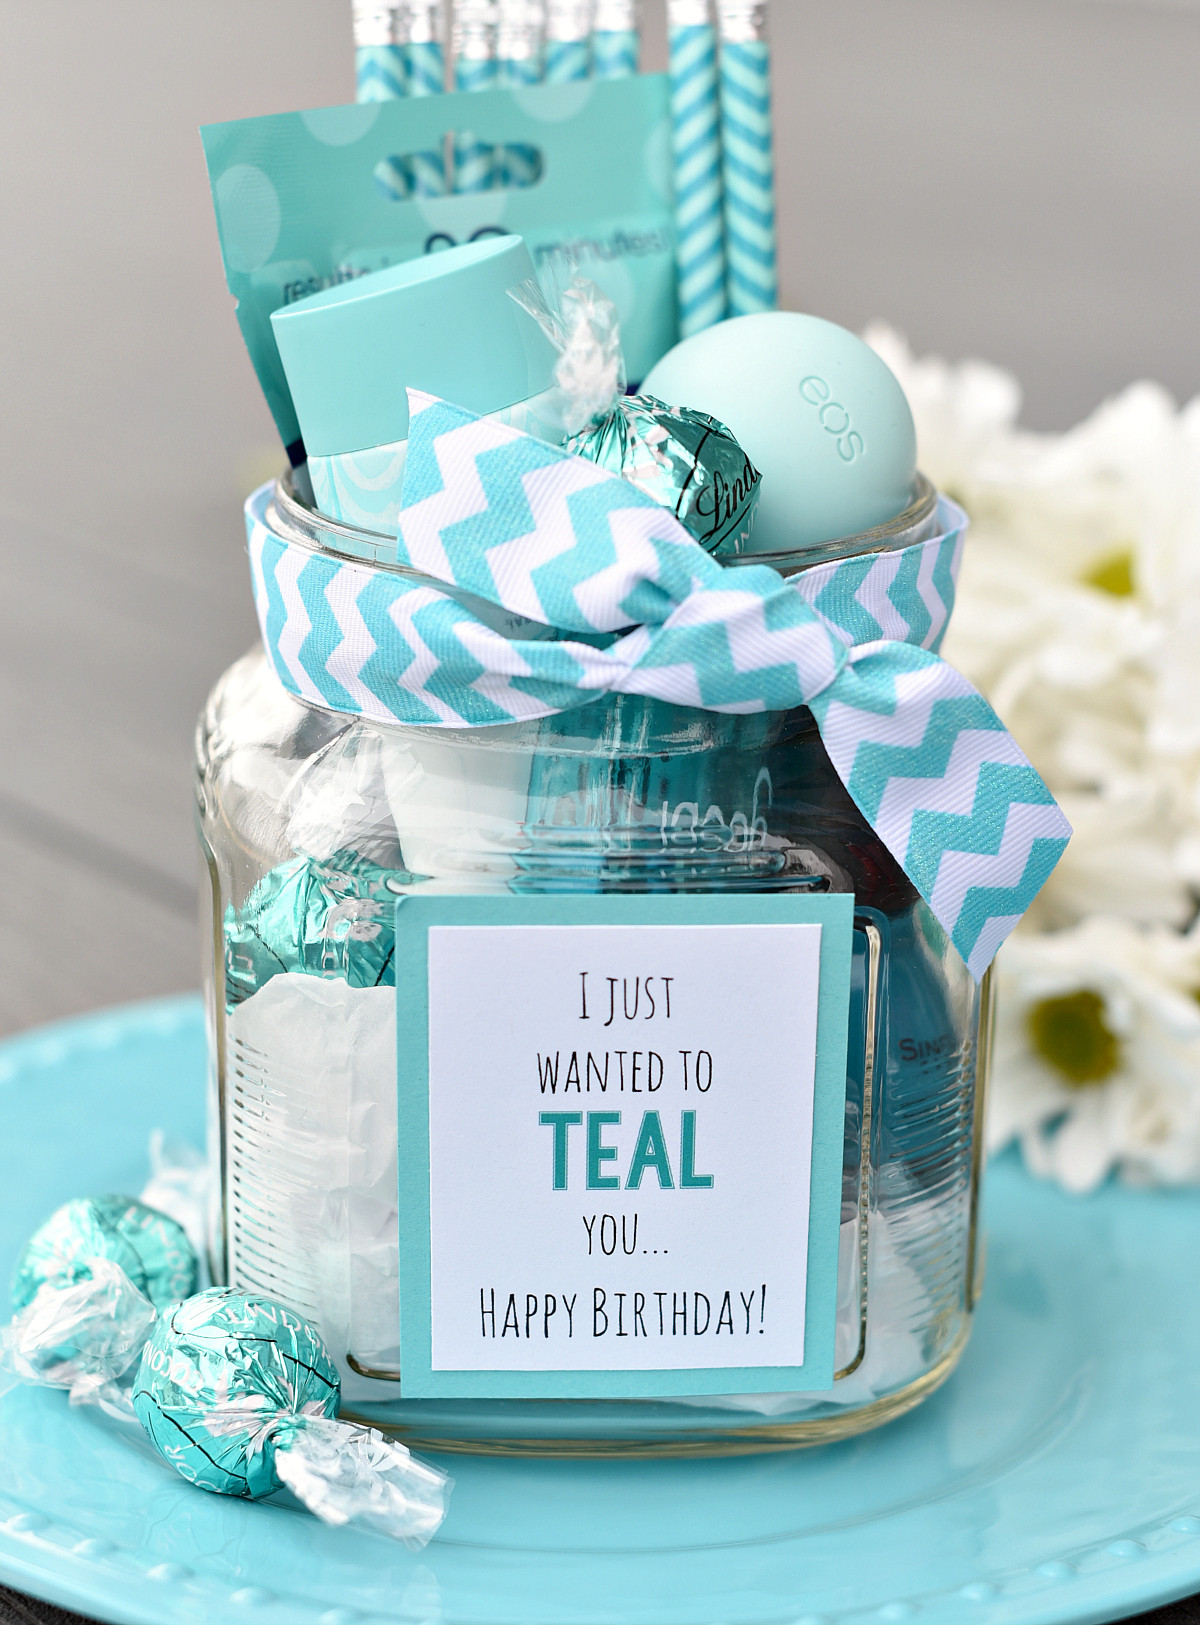 Best Birthday Gifts
 Teal Birthday Gift Idea for Friends – Fun Squared